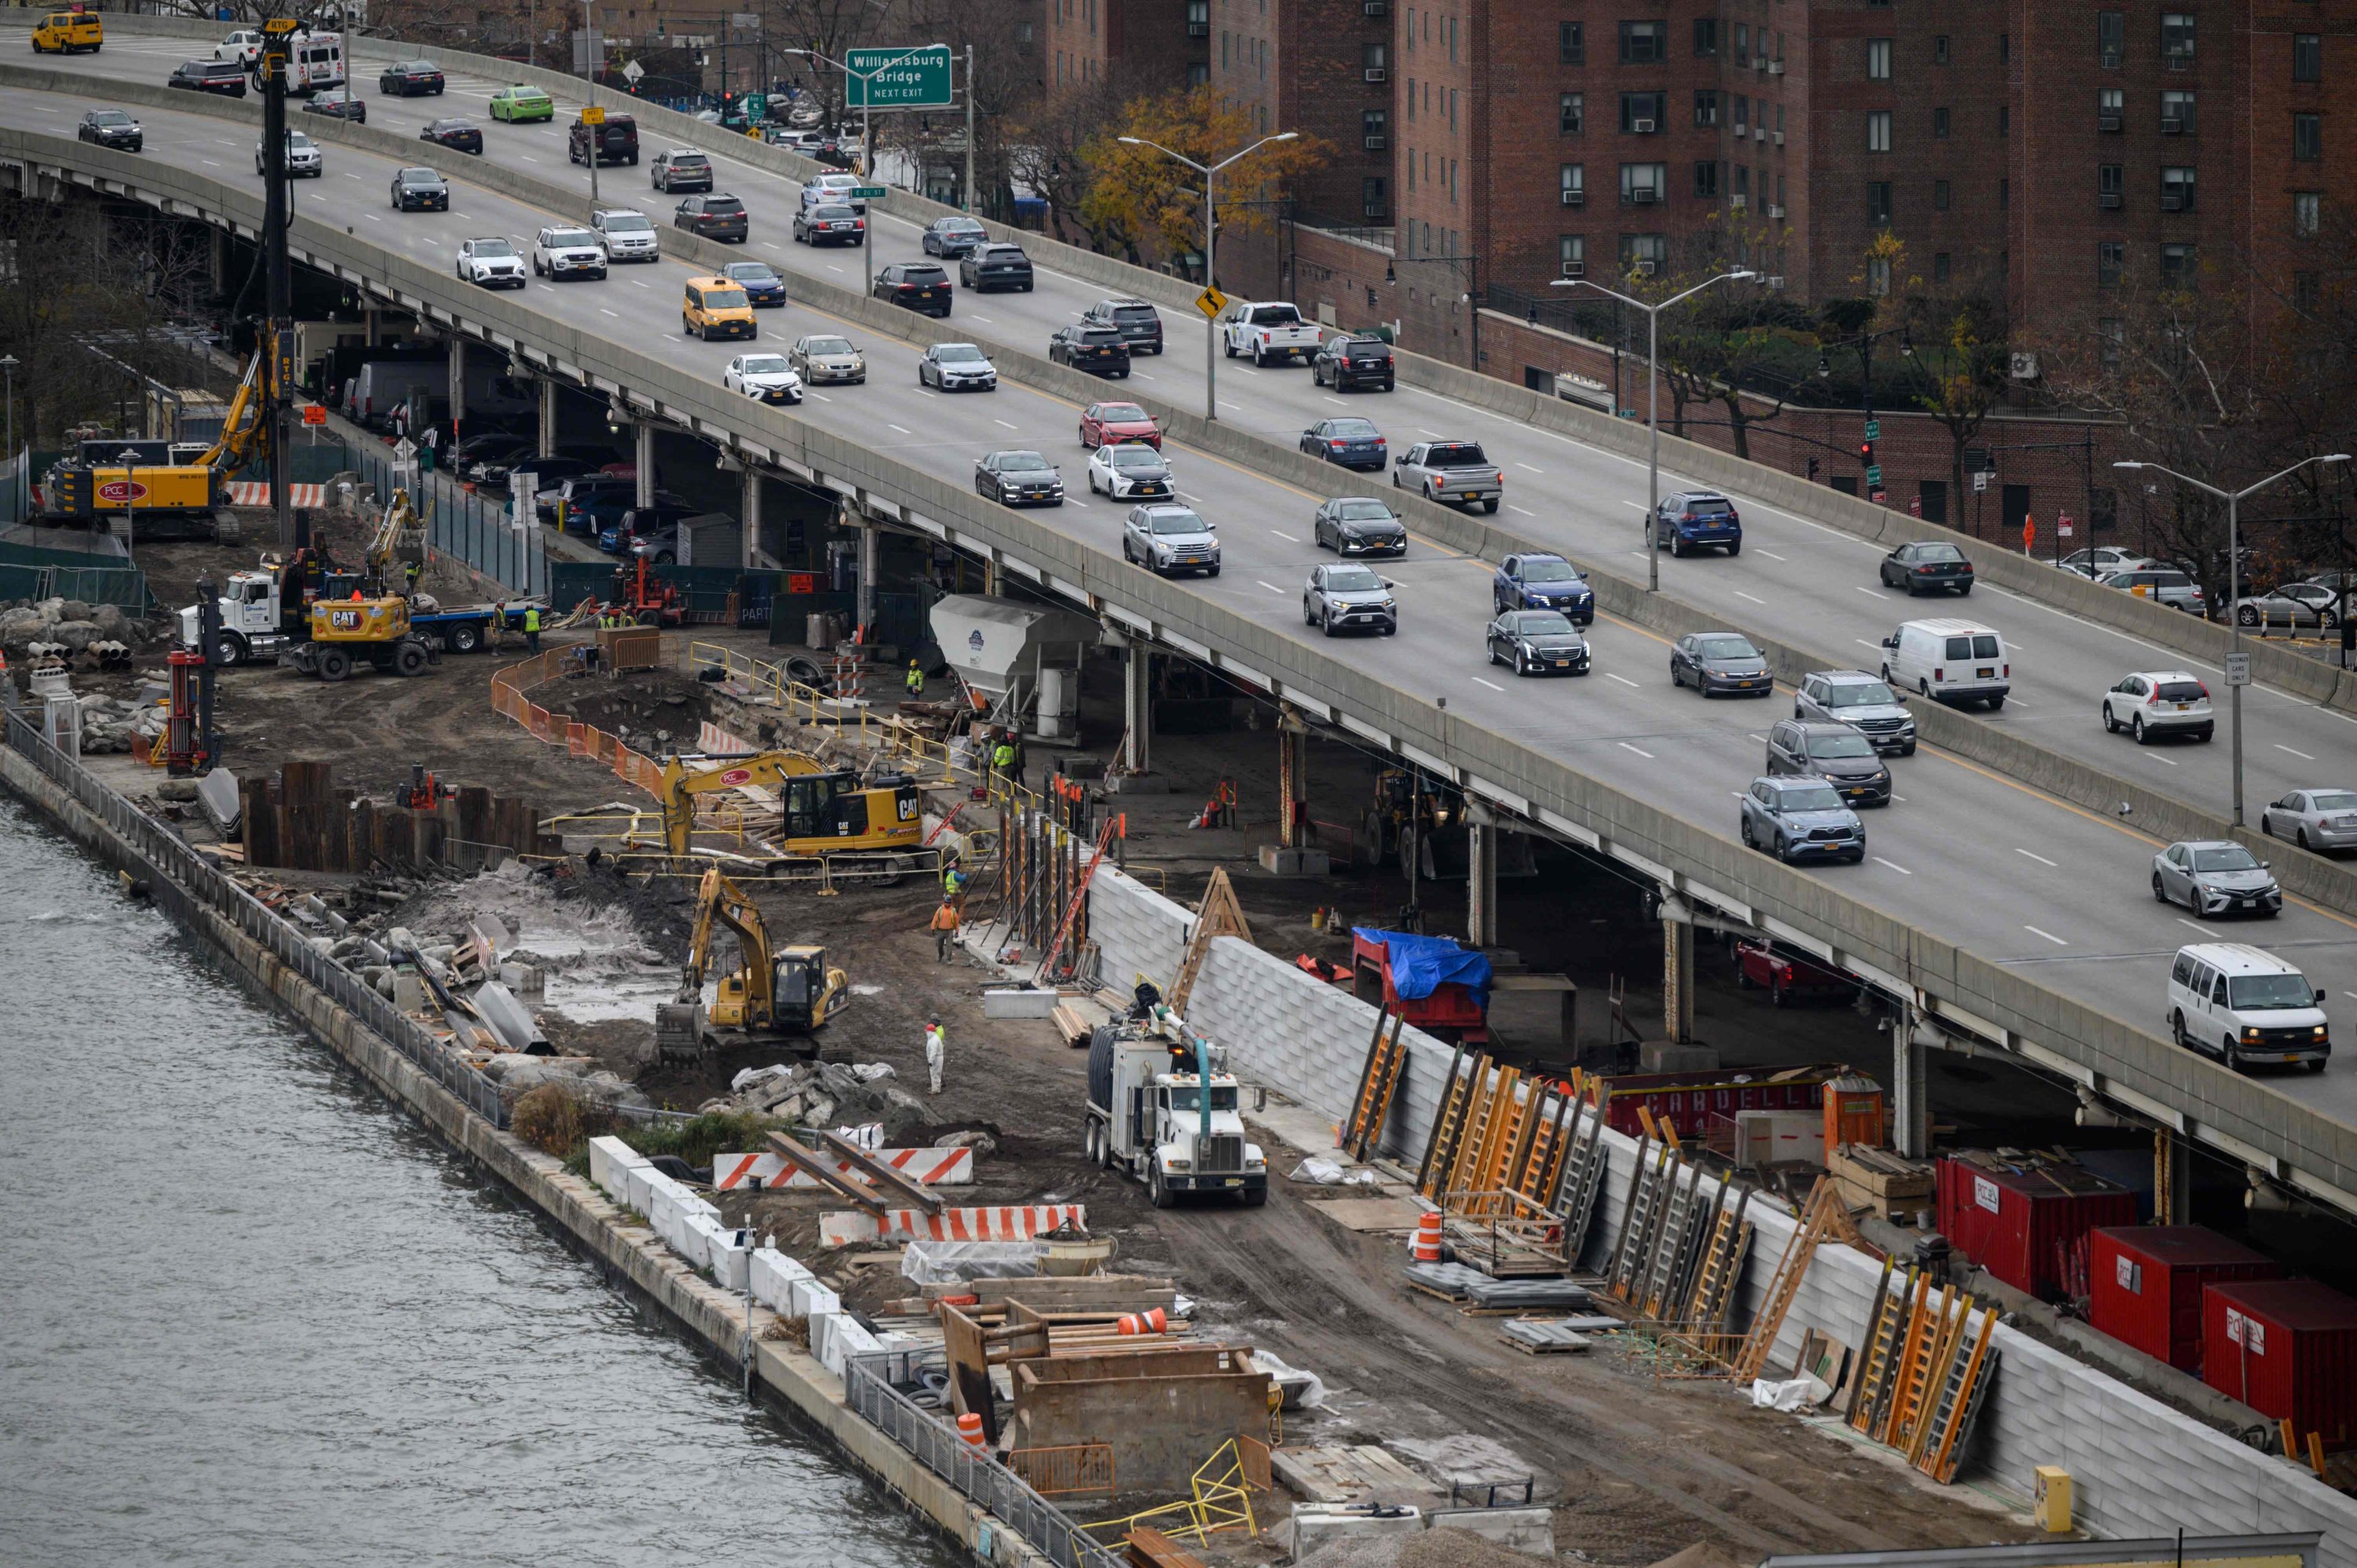 A general view shows contruction work on a flood defense project on the east side of Manhattan, New York, U.S., Dec. 12, 2021. (AFP Photo)